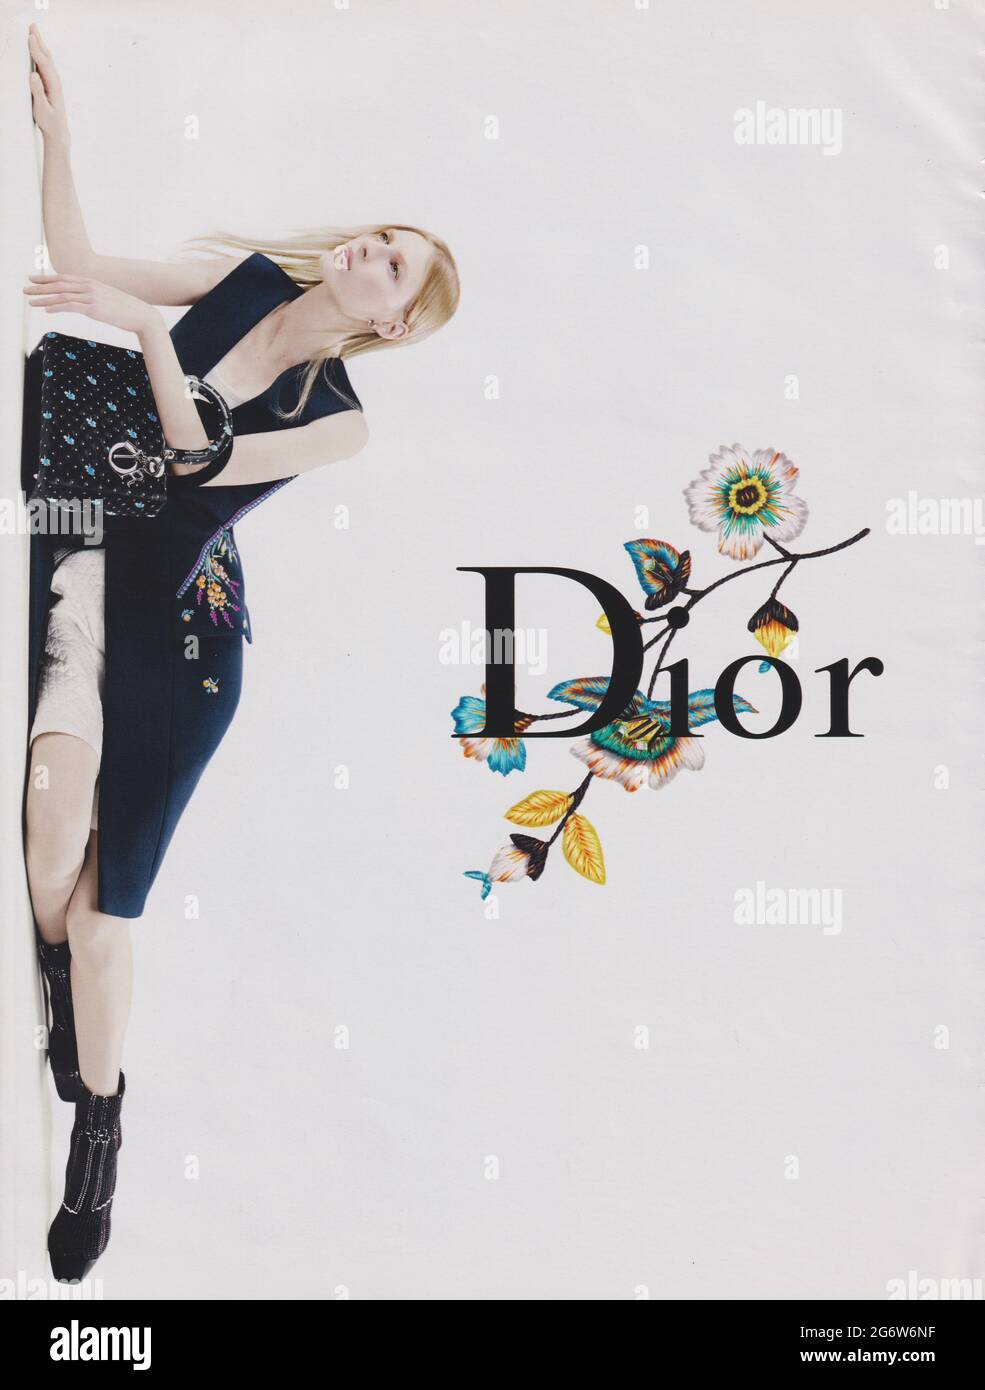 poster advertising Dior fashion house in paper magazine from 2015 year,  advertisement, creative Christian Dior advert from 2010s Stock Photo - Alamy